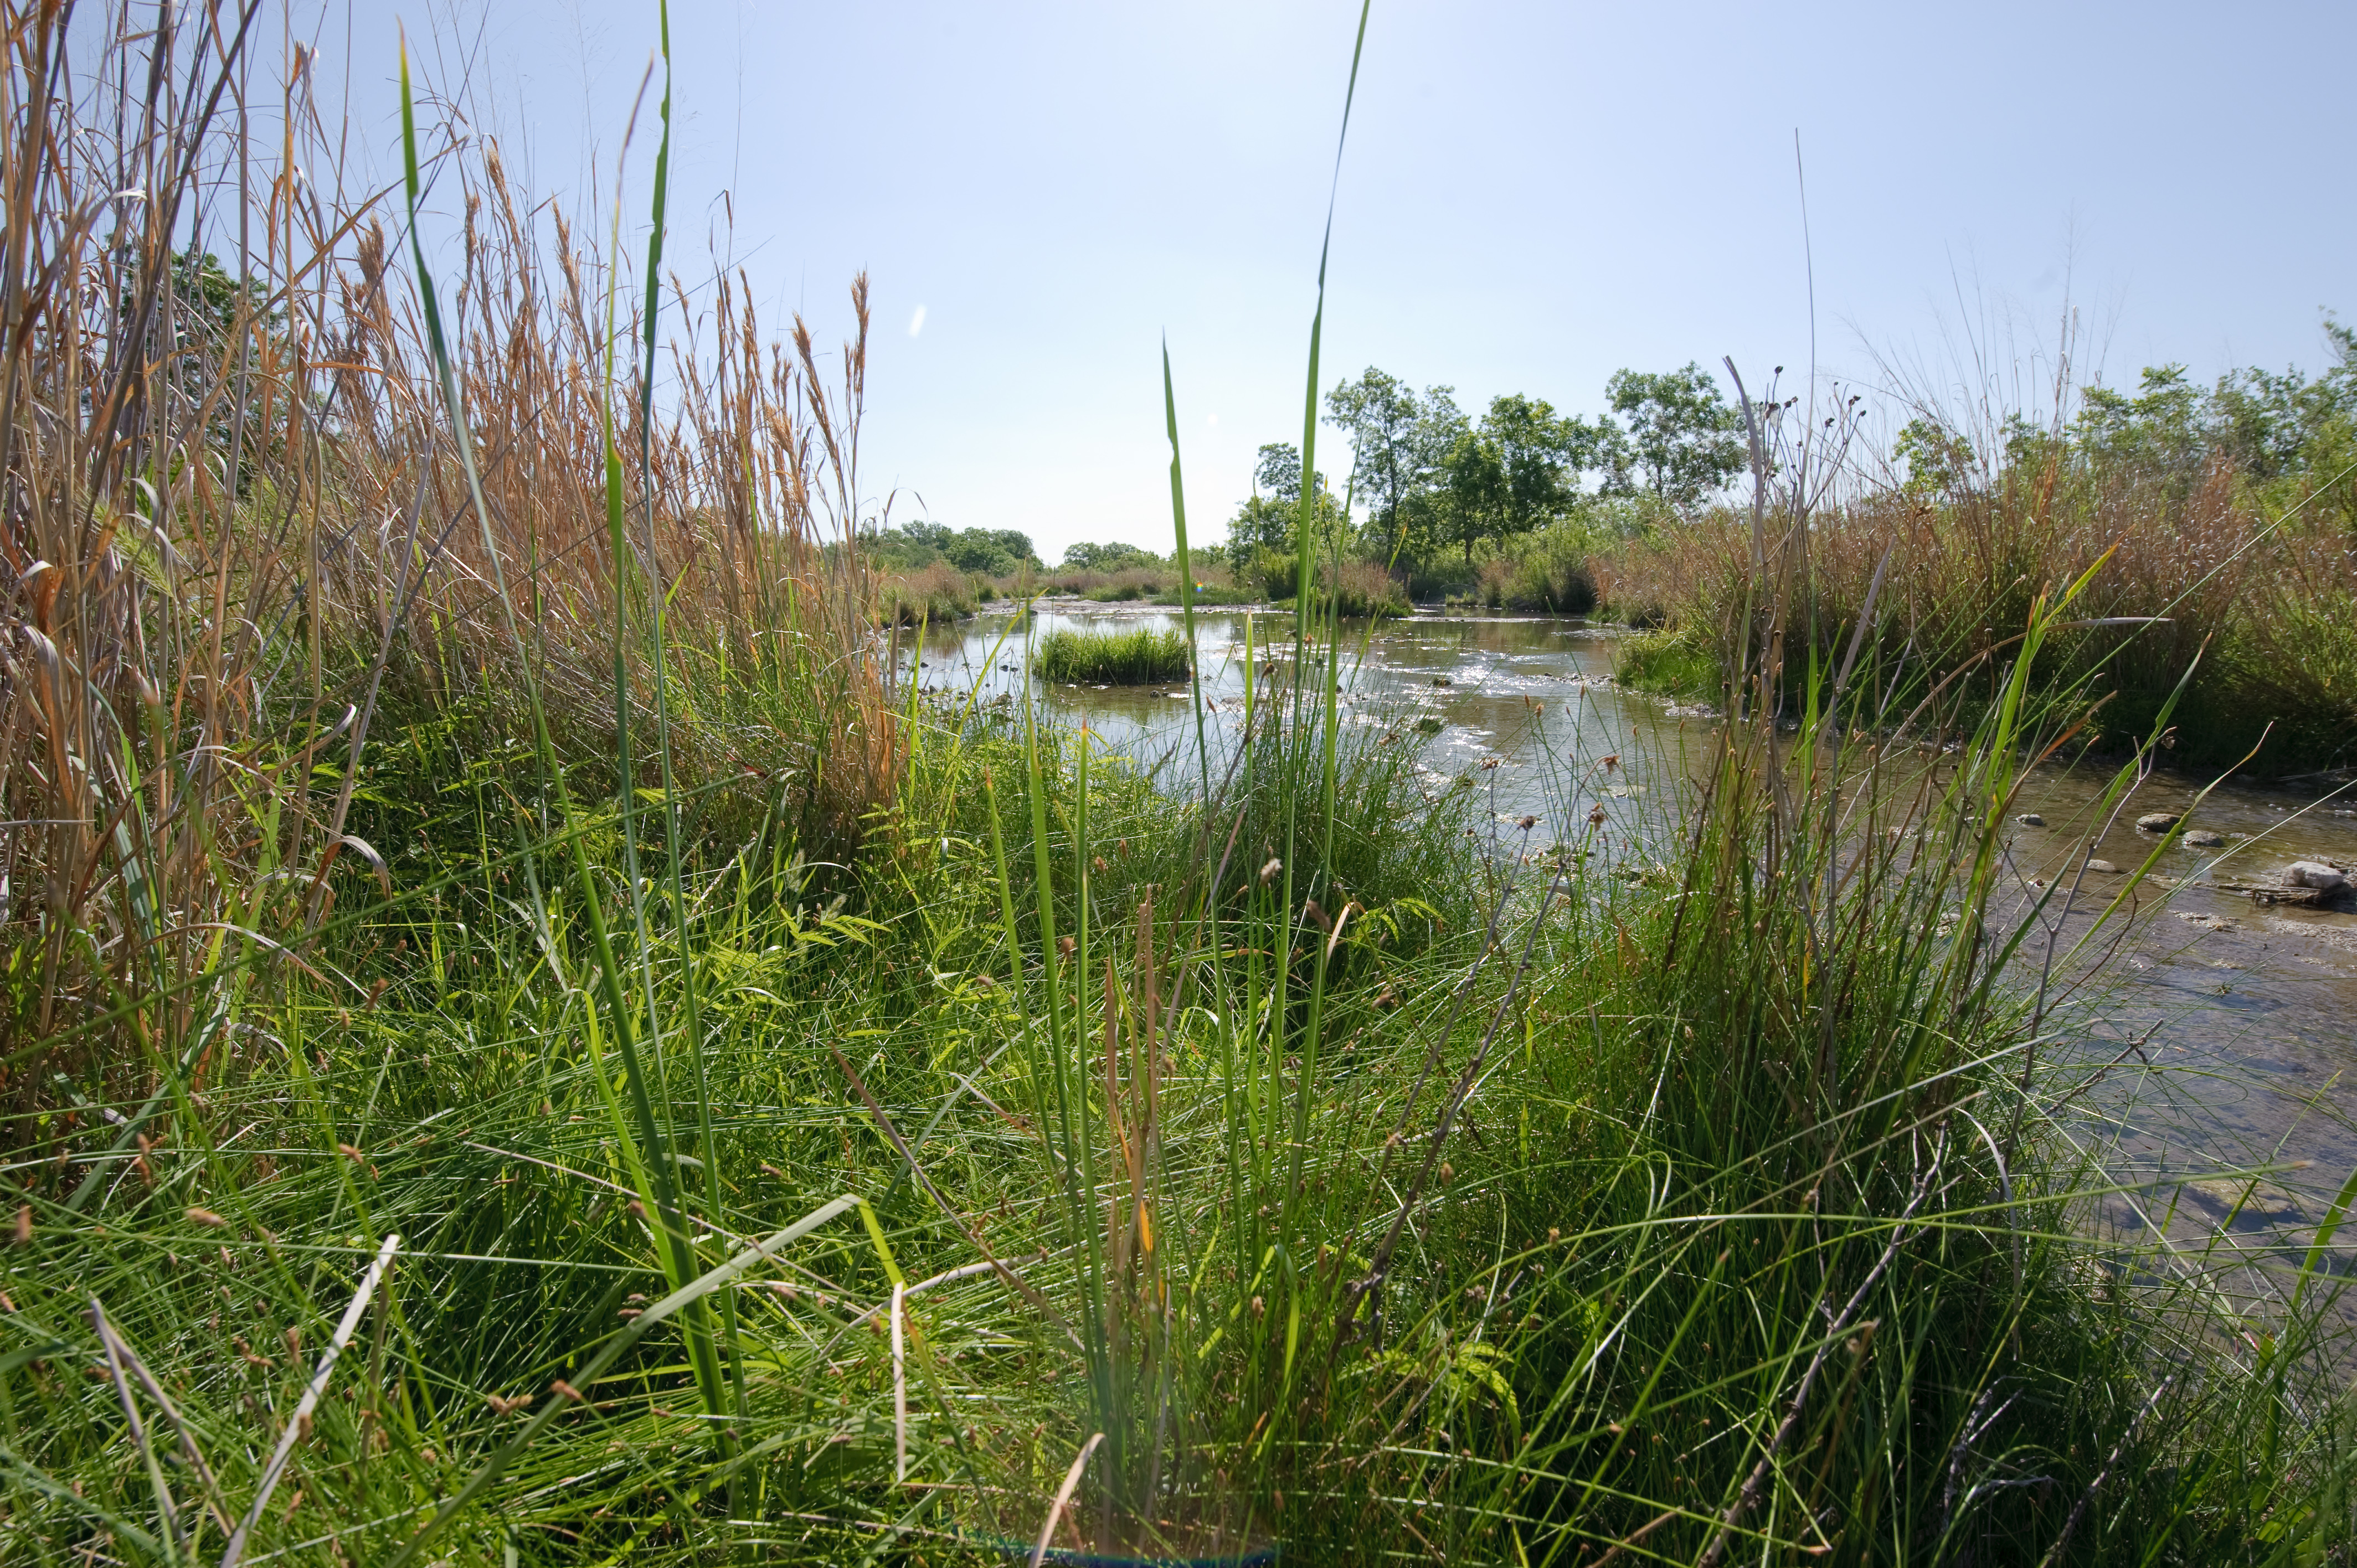 File:A Riparian Buffer offers a filtration system that generated by mother nature. Plants work together to filtrate out pollutants that could make it into the water flow. (24817333740).jpg - Wikimedia Commons